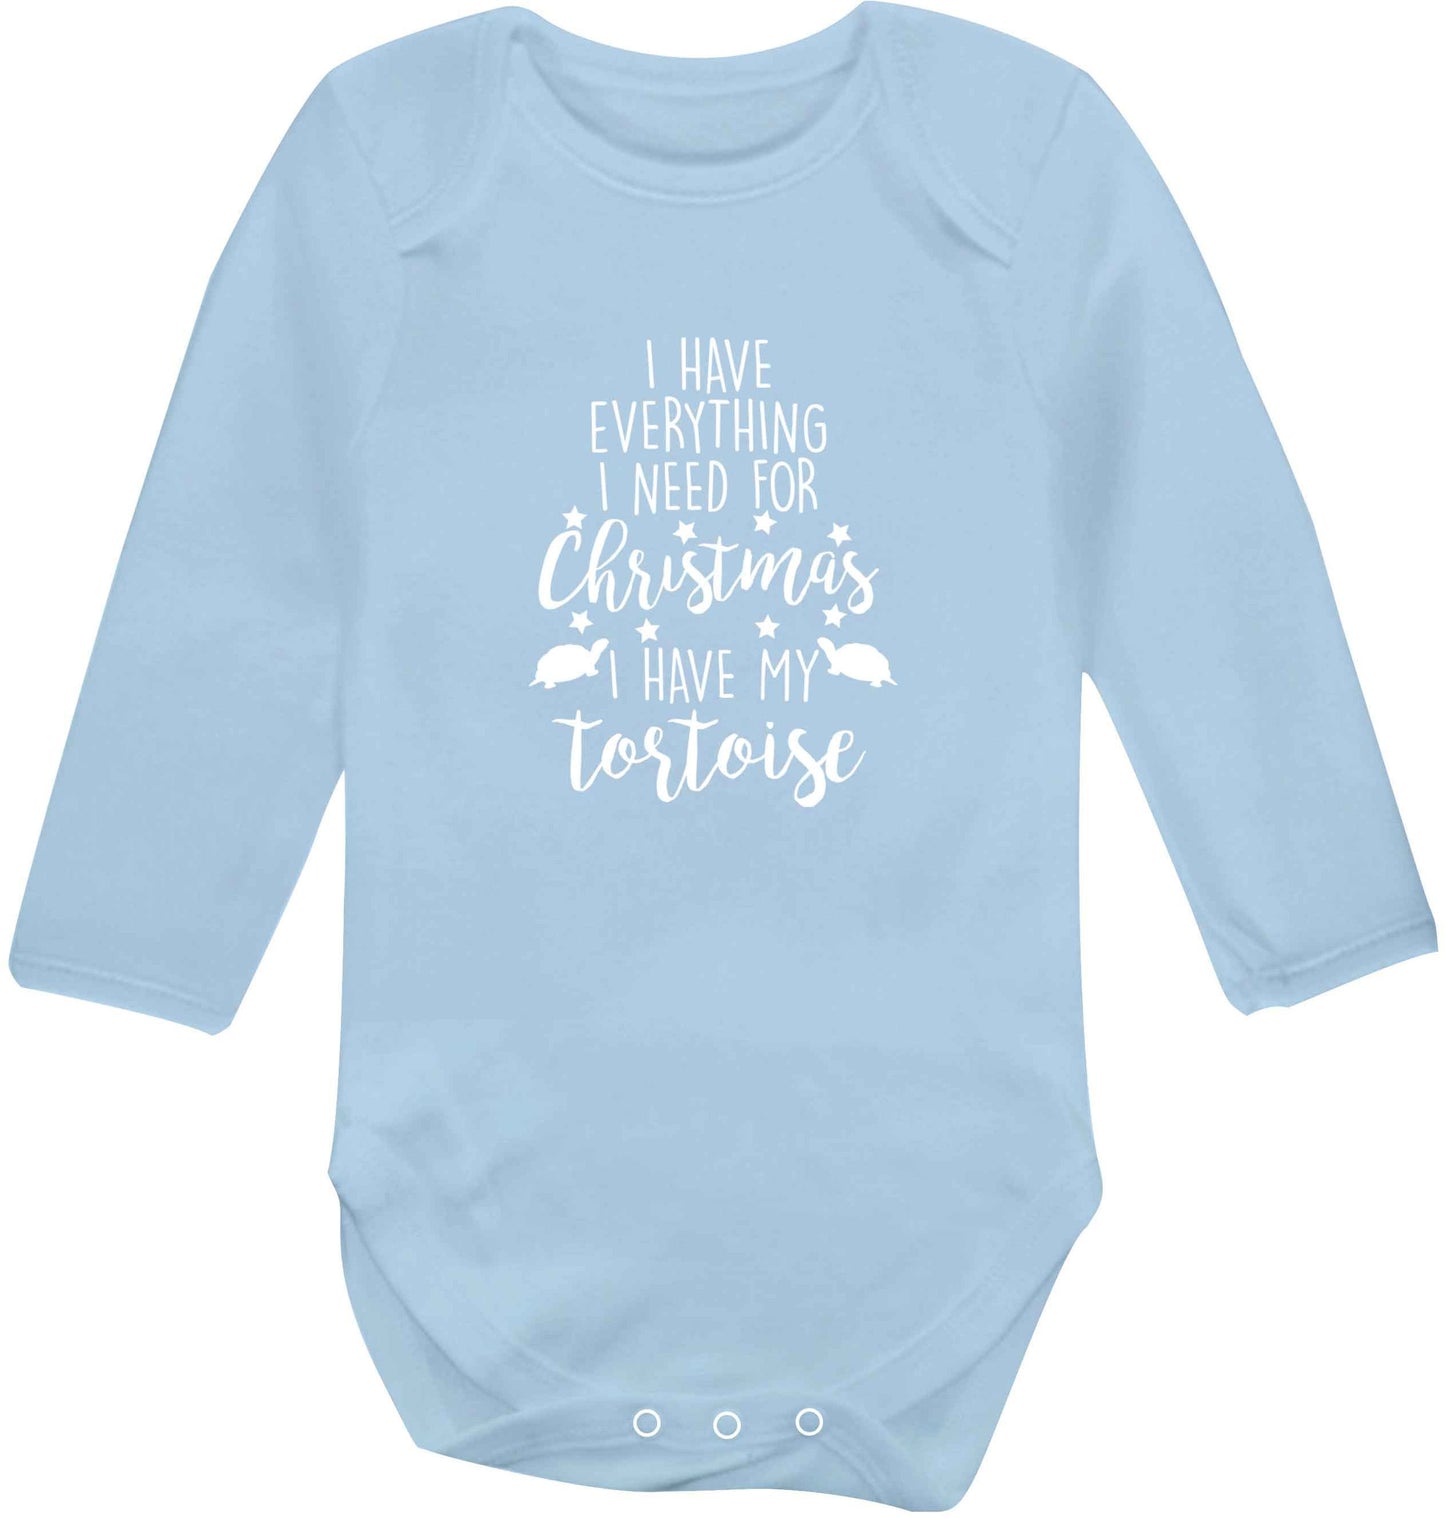 I have everything I need for Christmas I have my tortoise baby vest long sleeved pale blue 6-12 months